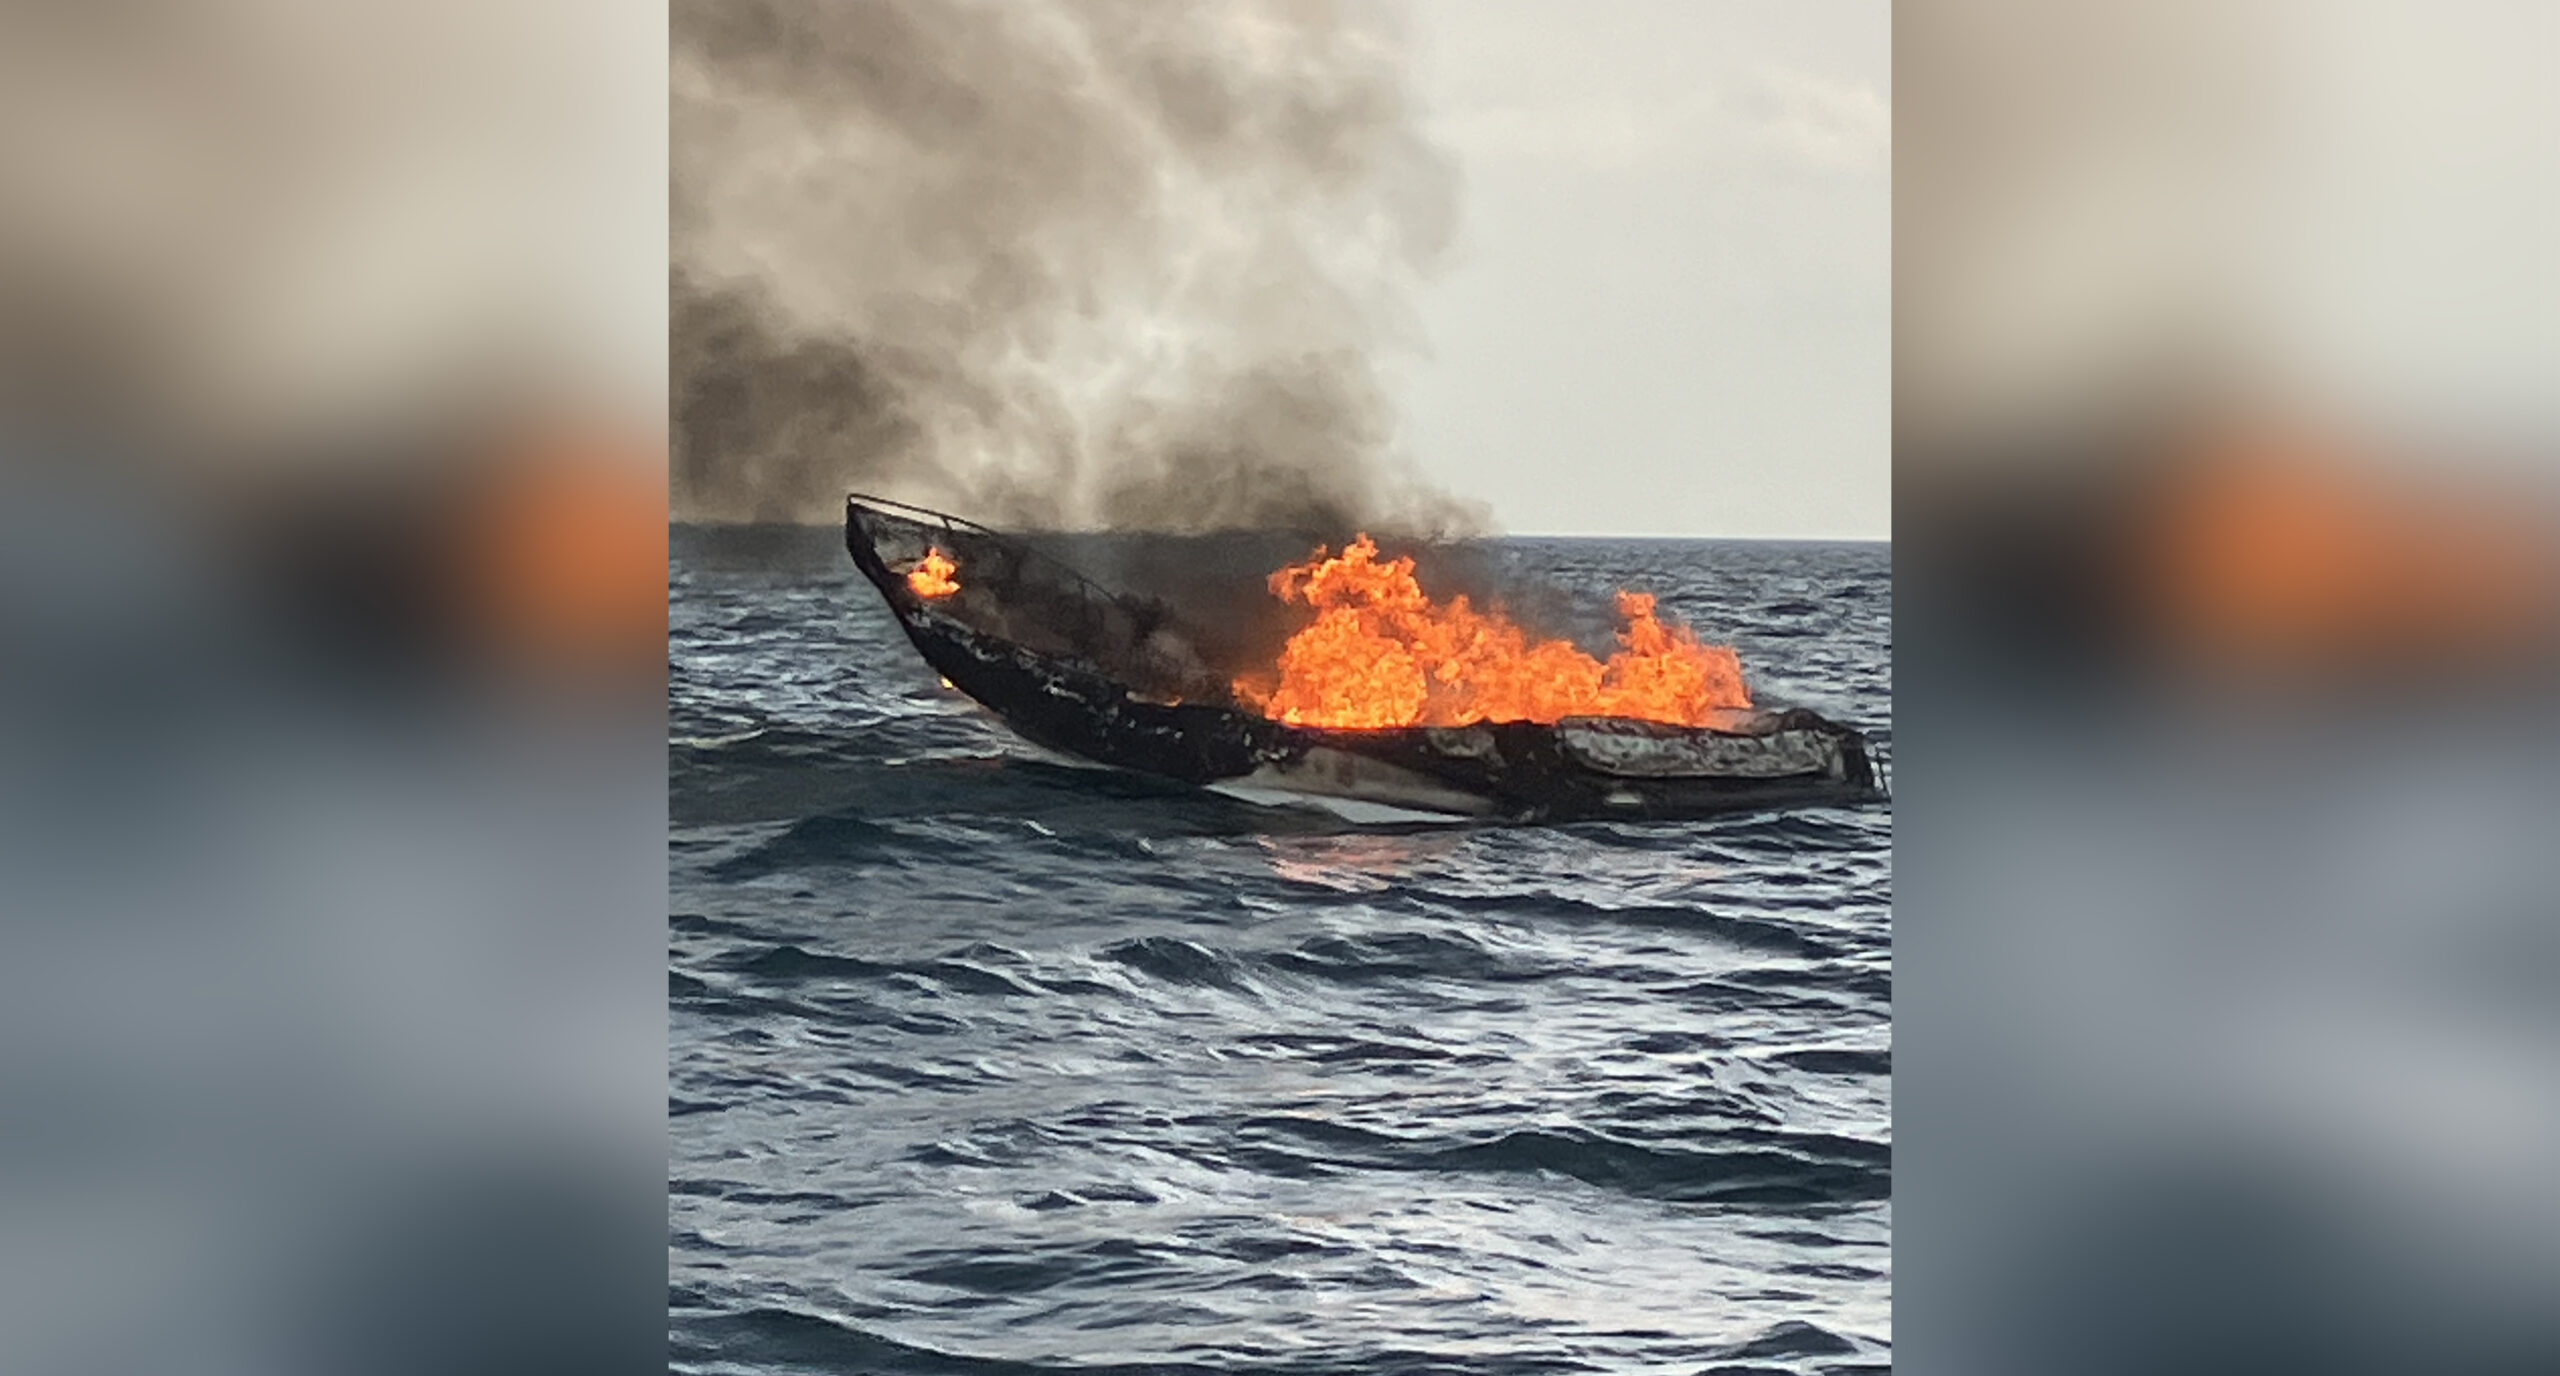 2 victims hospitalized after boat explosion and fire on Lake Michigan near Waukegan